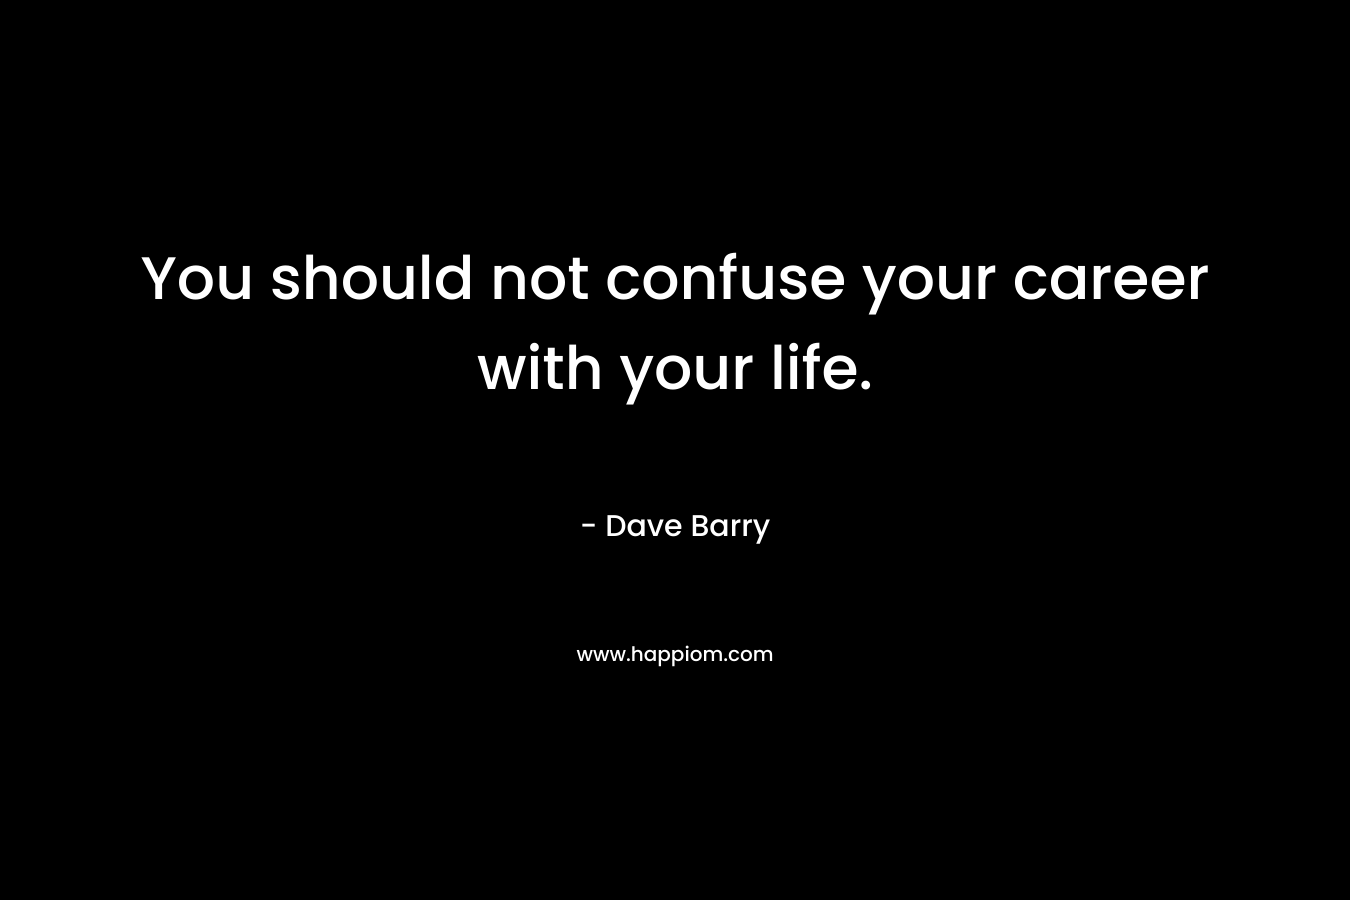 You should not confuse your career with your life.